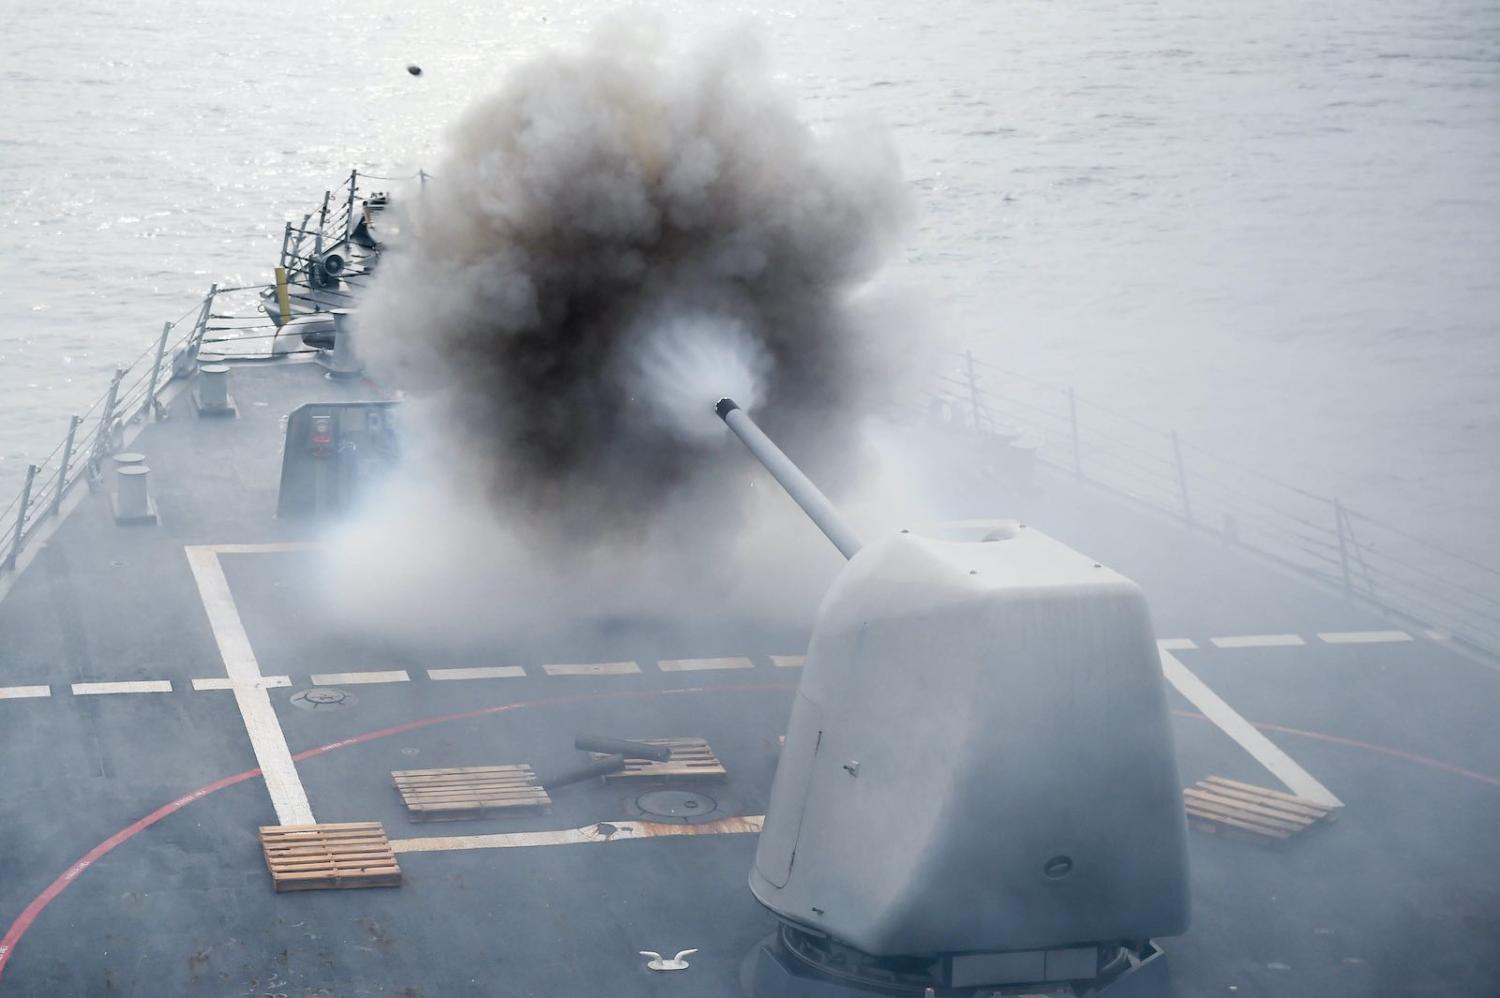 Live fire exercises on the USS Stethem near Singapore in 2016 (US Navy/Flickr)